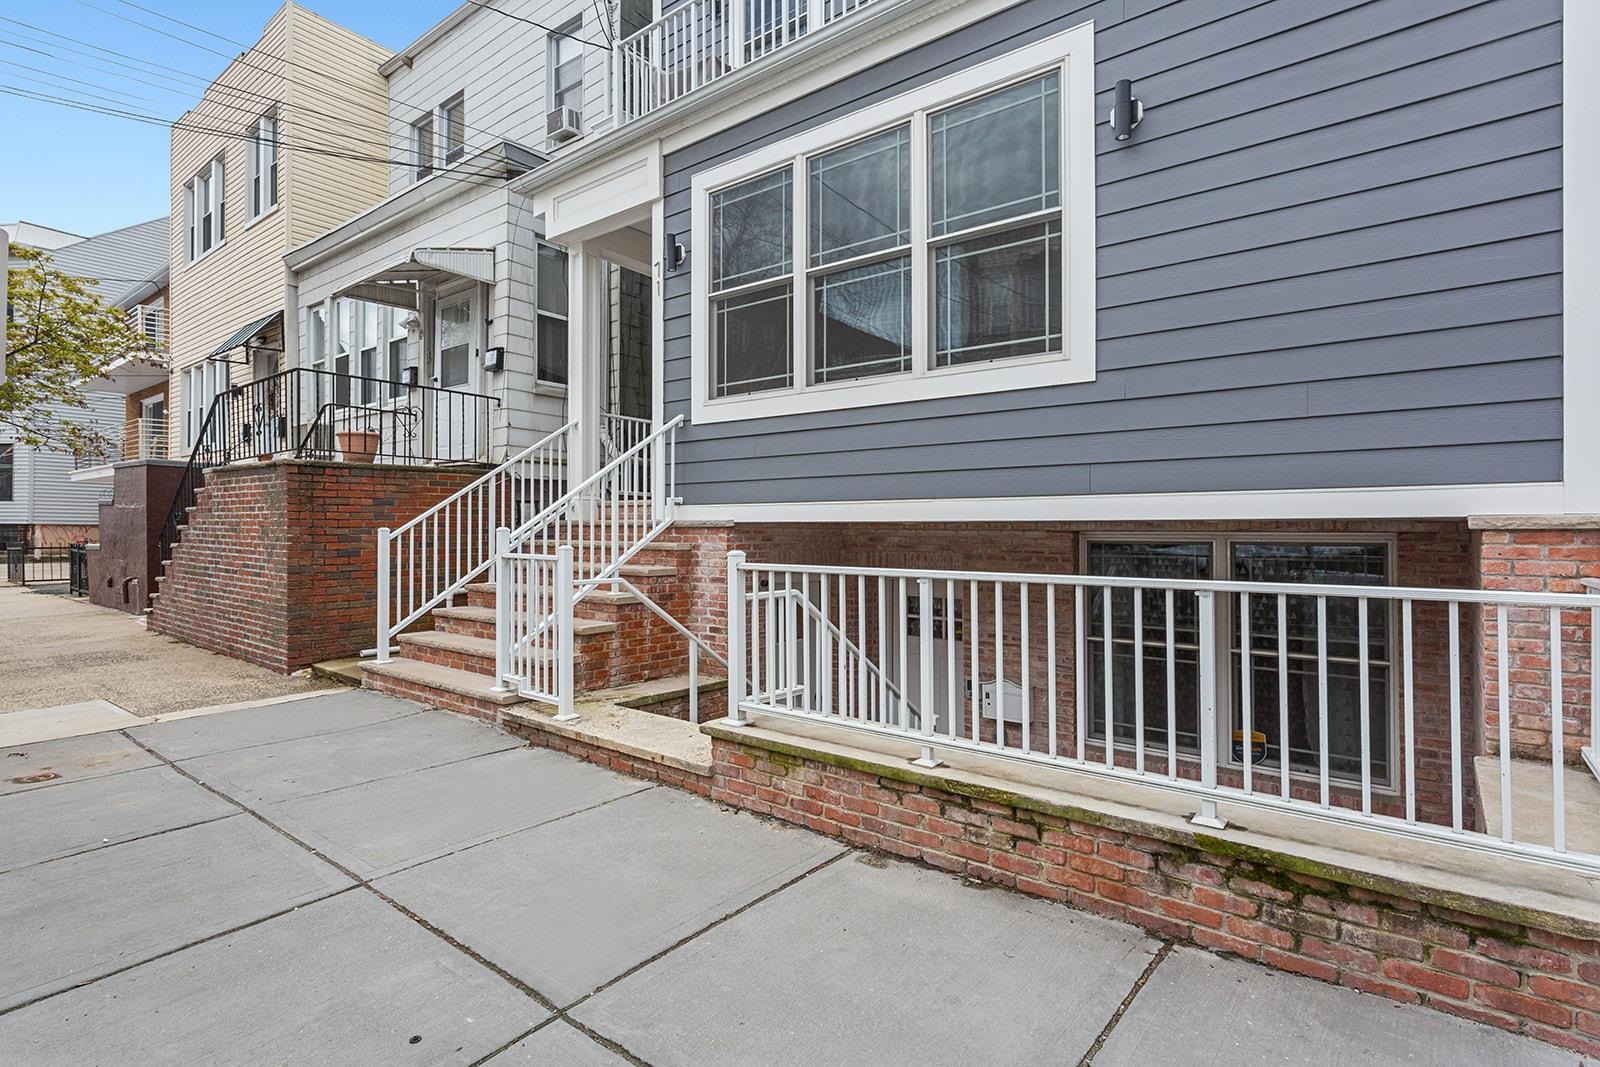 # 240006424 - For Rent in JERSEY CITY - Heights NJ